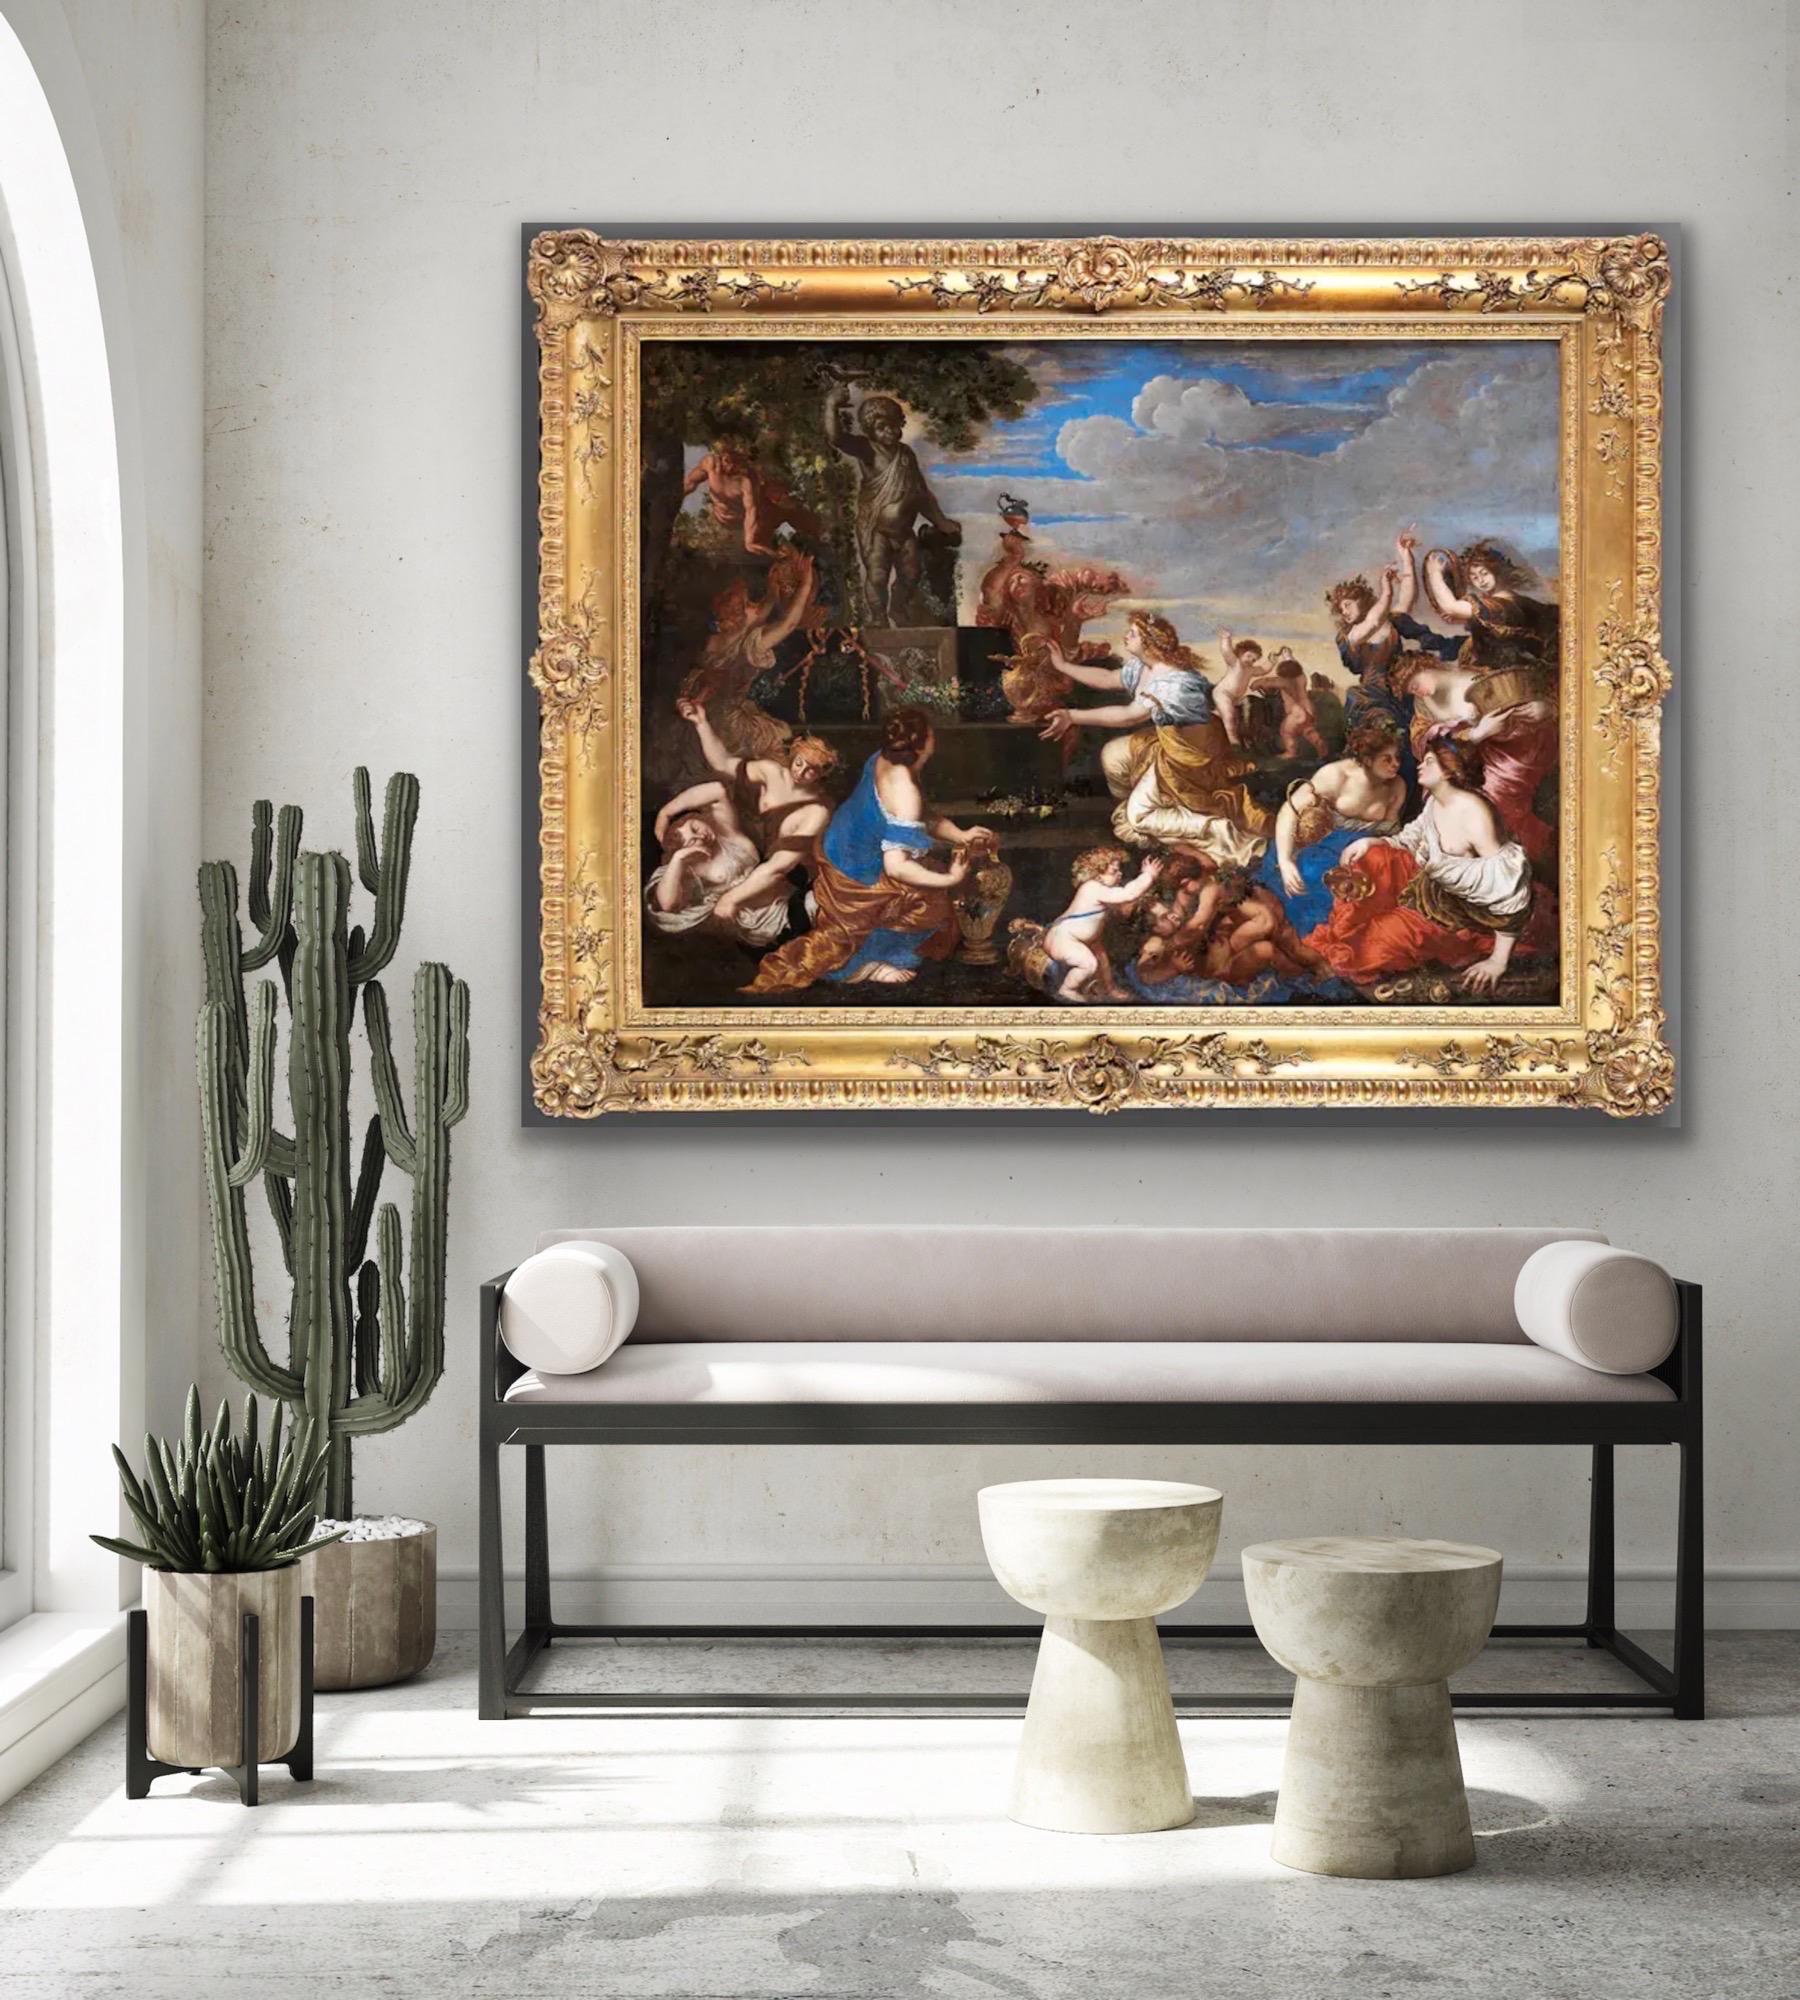 Huge 17th century old master - The feast of Bacchus - celebration Poussin 2